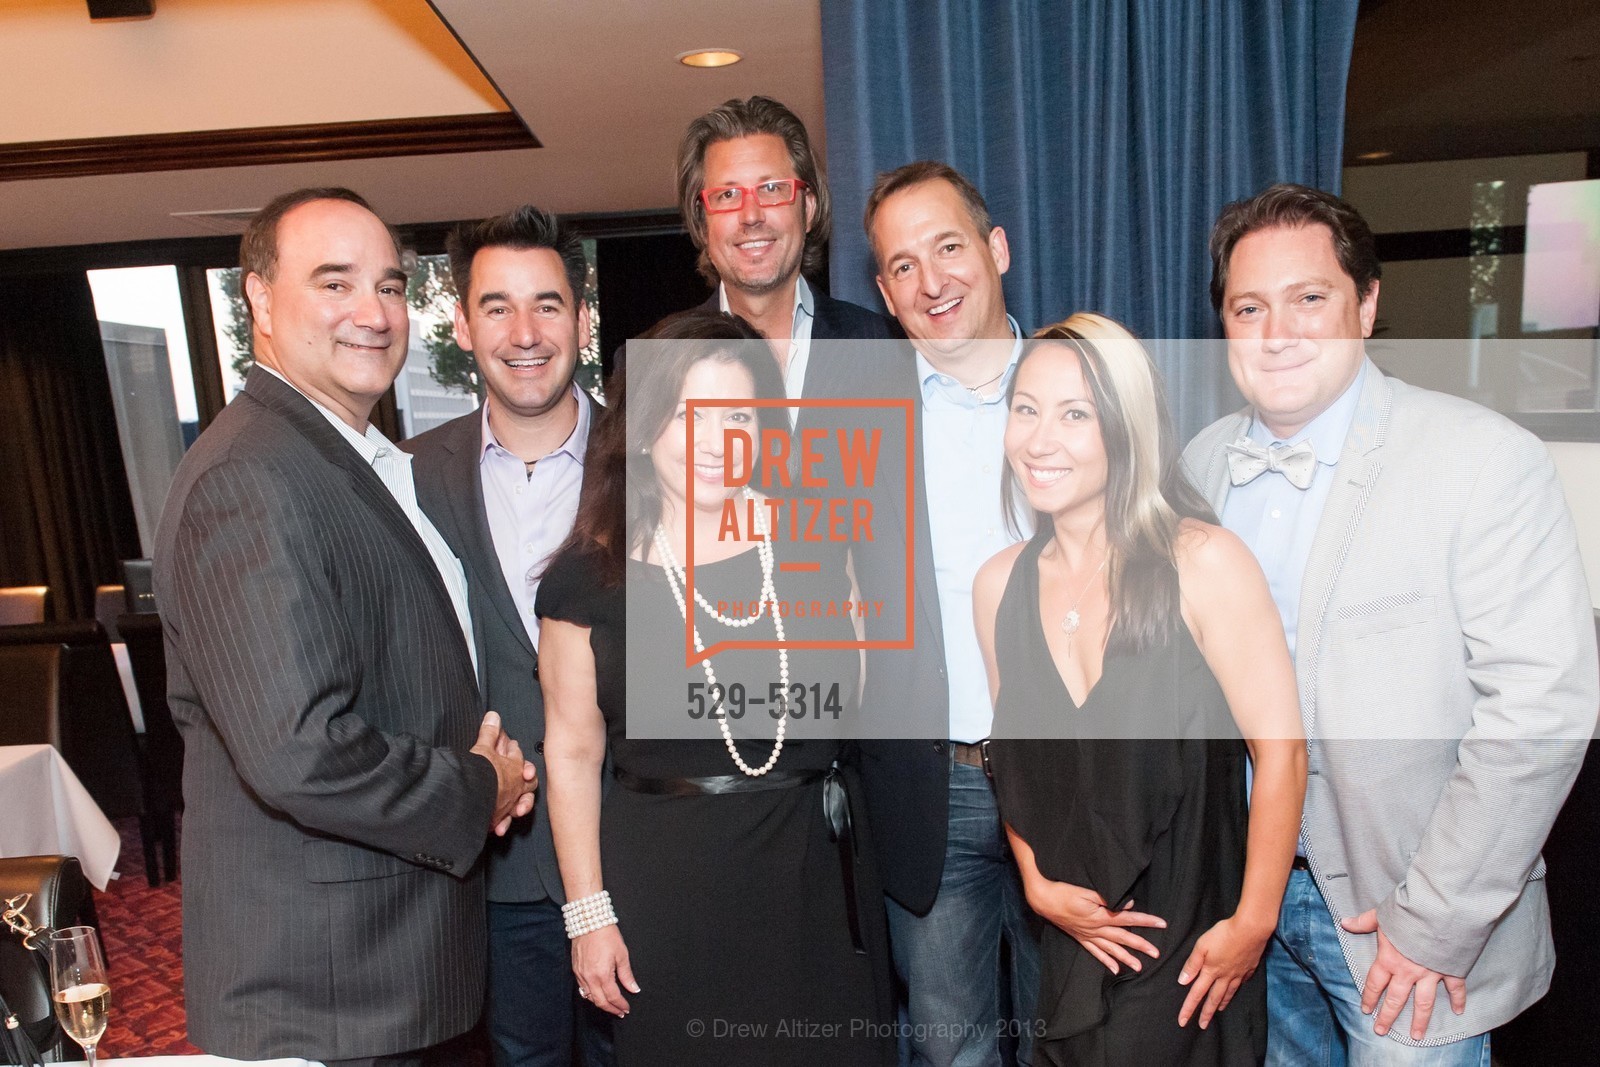 Bill Diapoulos, Samara Diapoulos, James Stolich, Robert Moon, Liam Mayclem, Photo #529-5314